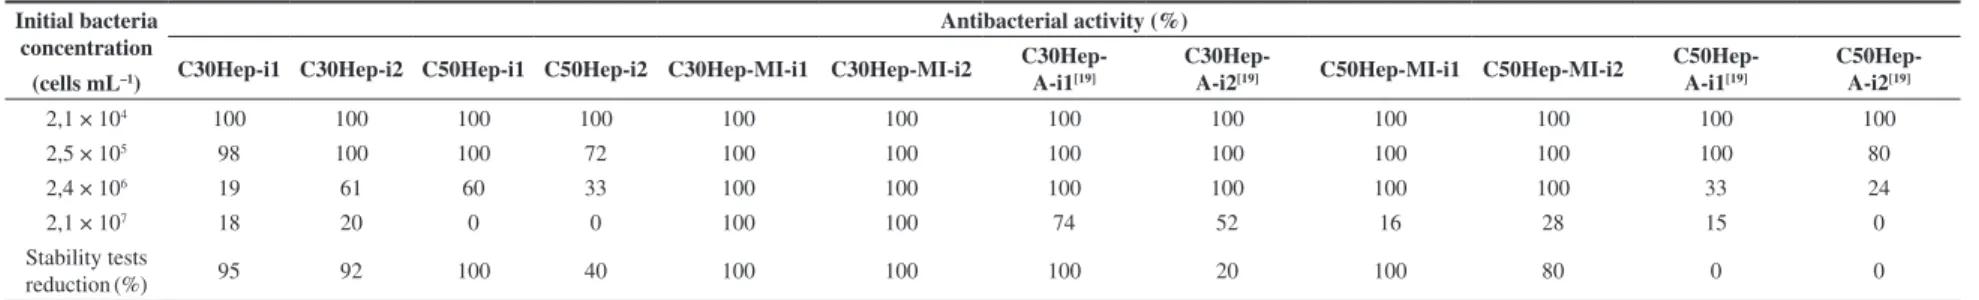 Table 3. Antibacterial activity of polymeric charge transfer complexes against Escherichia Coli suspensions